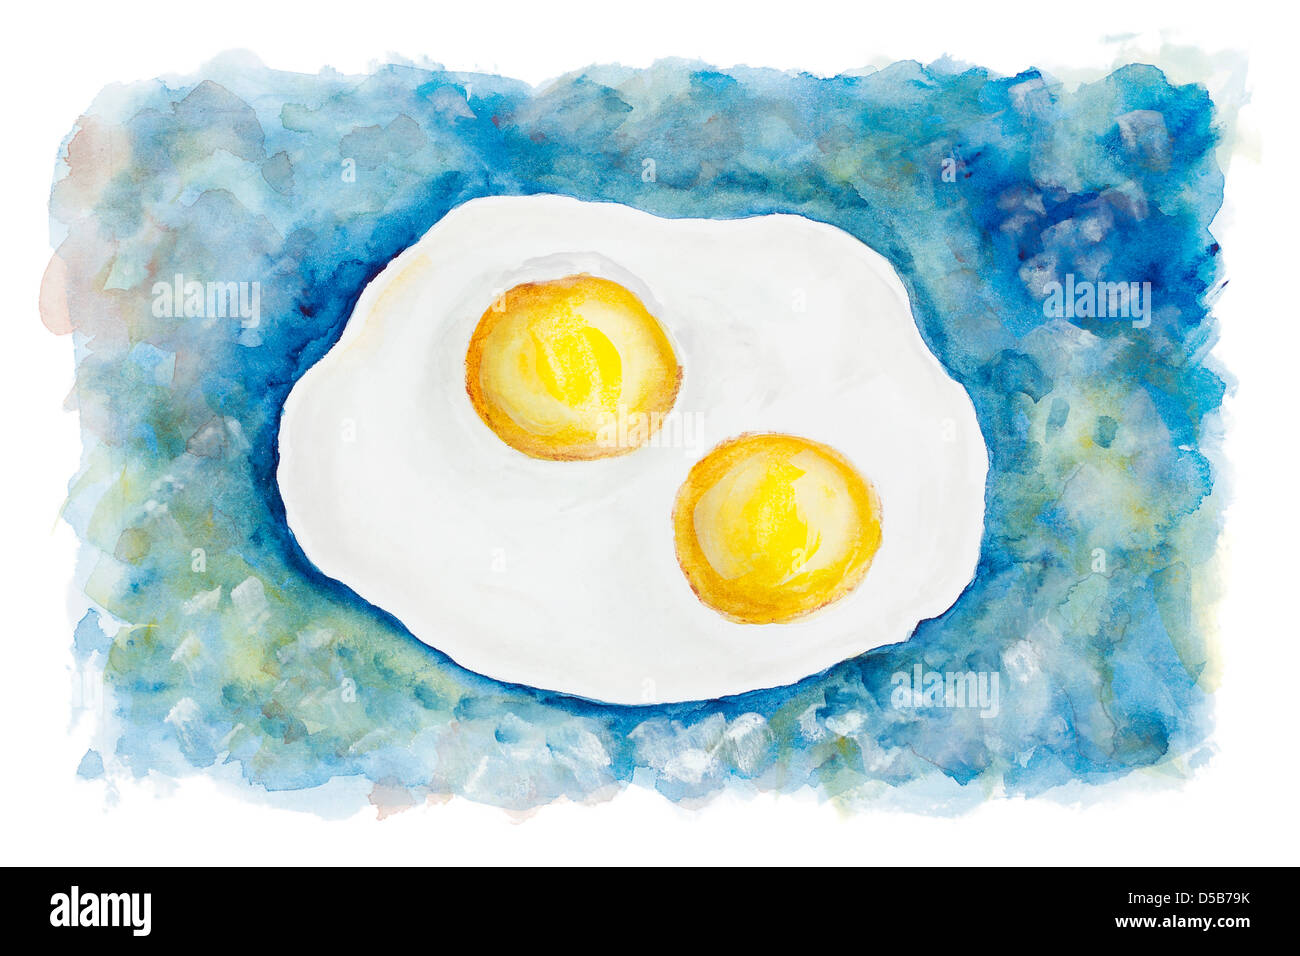 Heavenly flying fried eggs on two persons abstract concept isolated- handmade watercolor painting illustration on a white paper Stock Photo